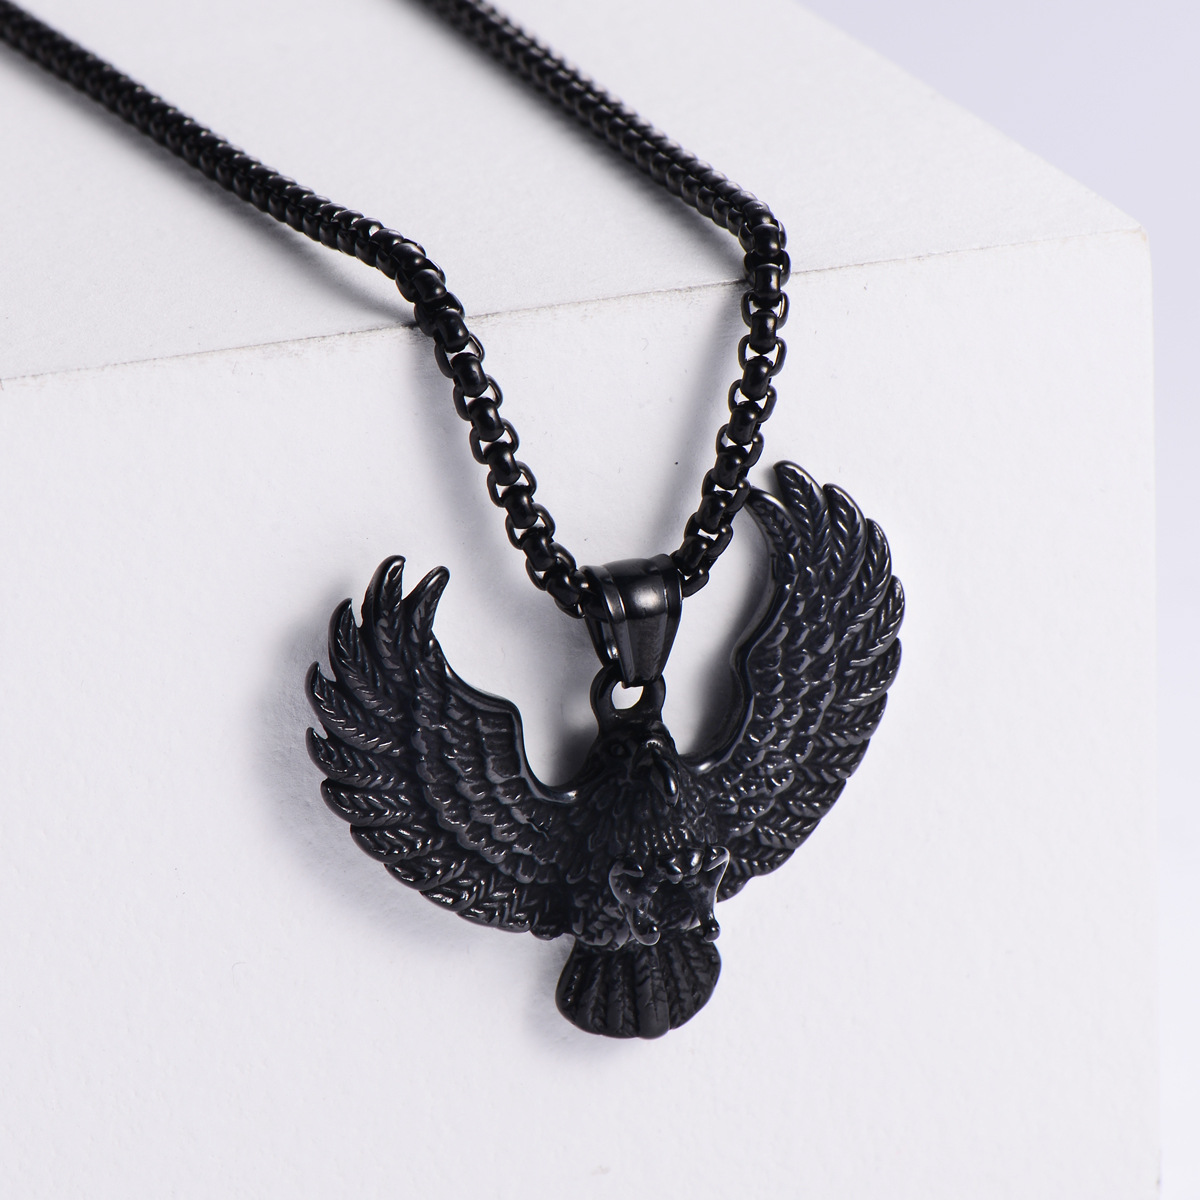 4:【Black】with chain pendant